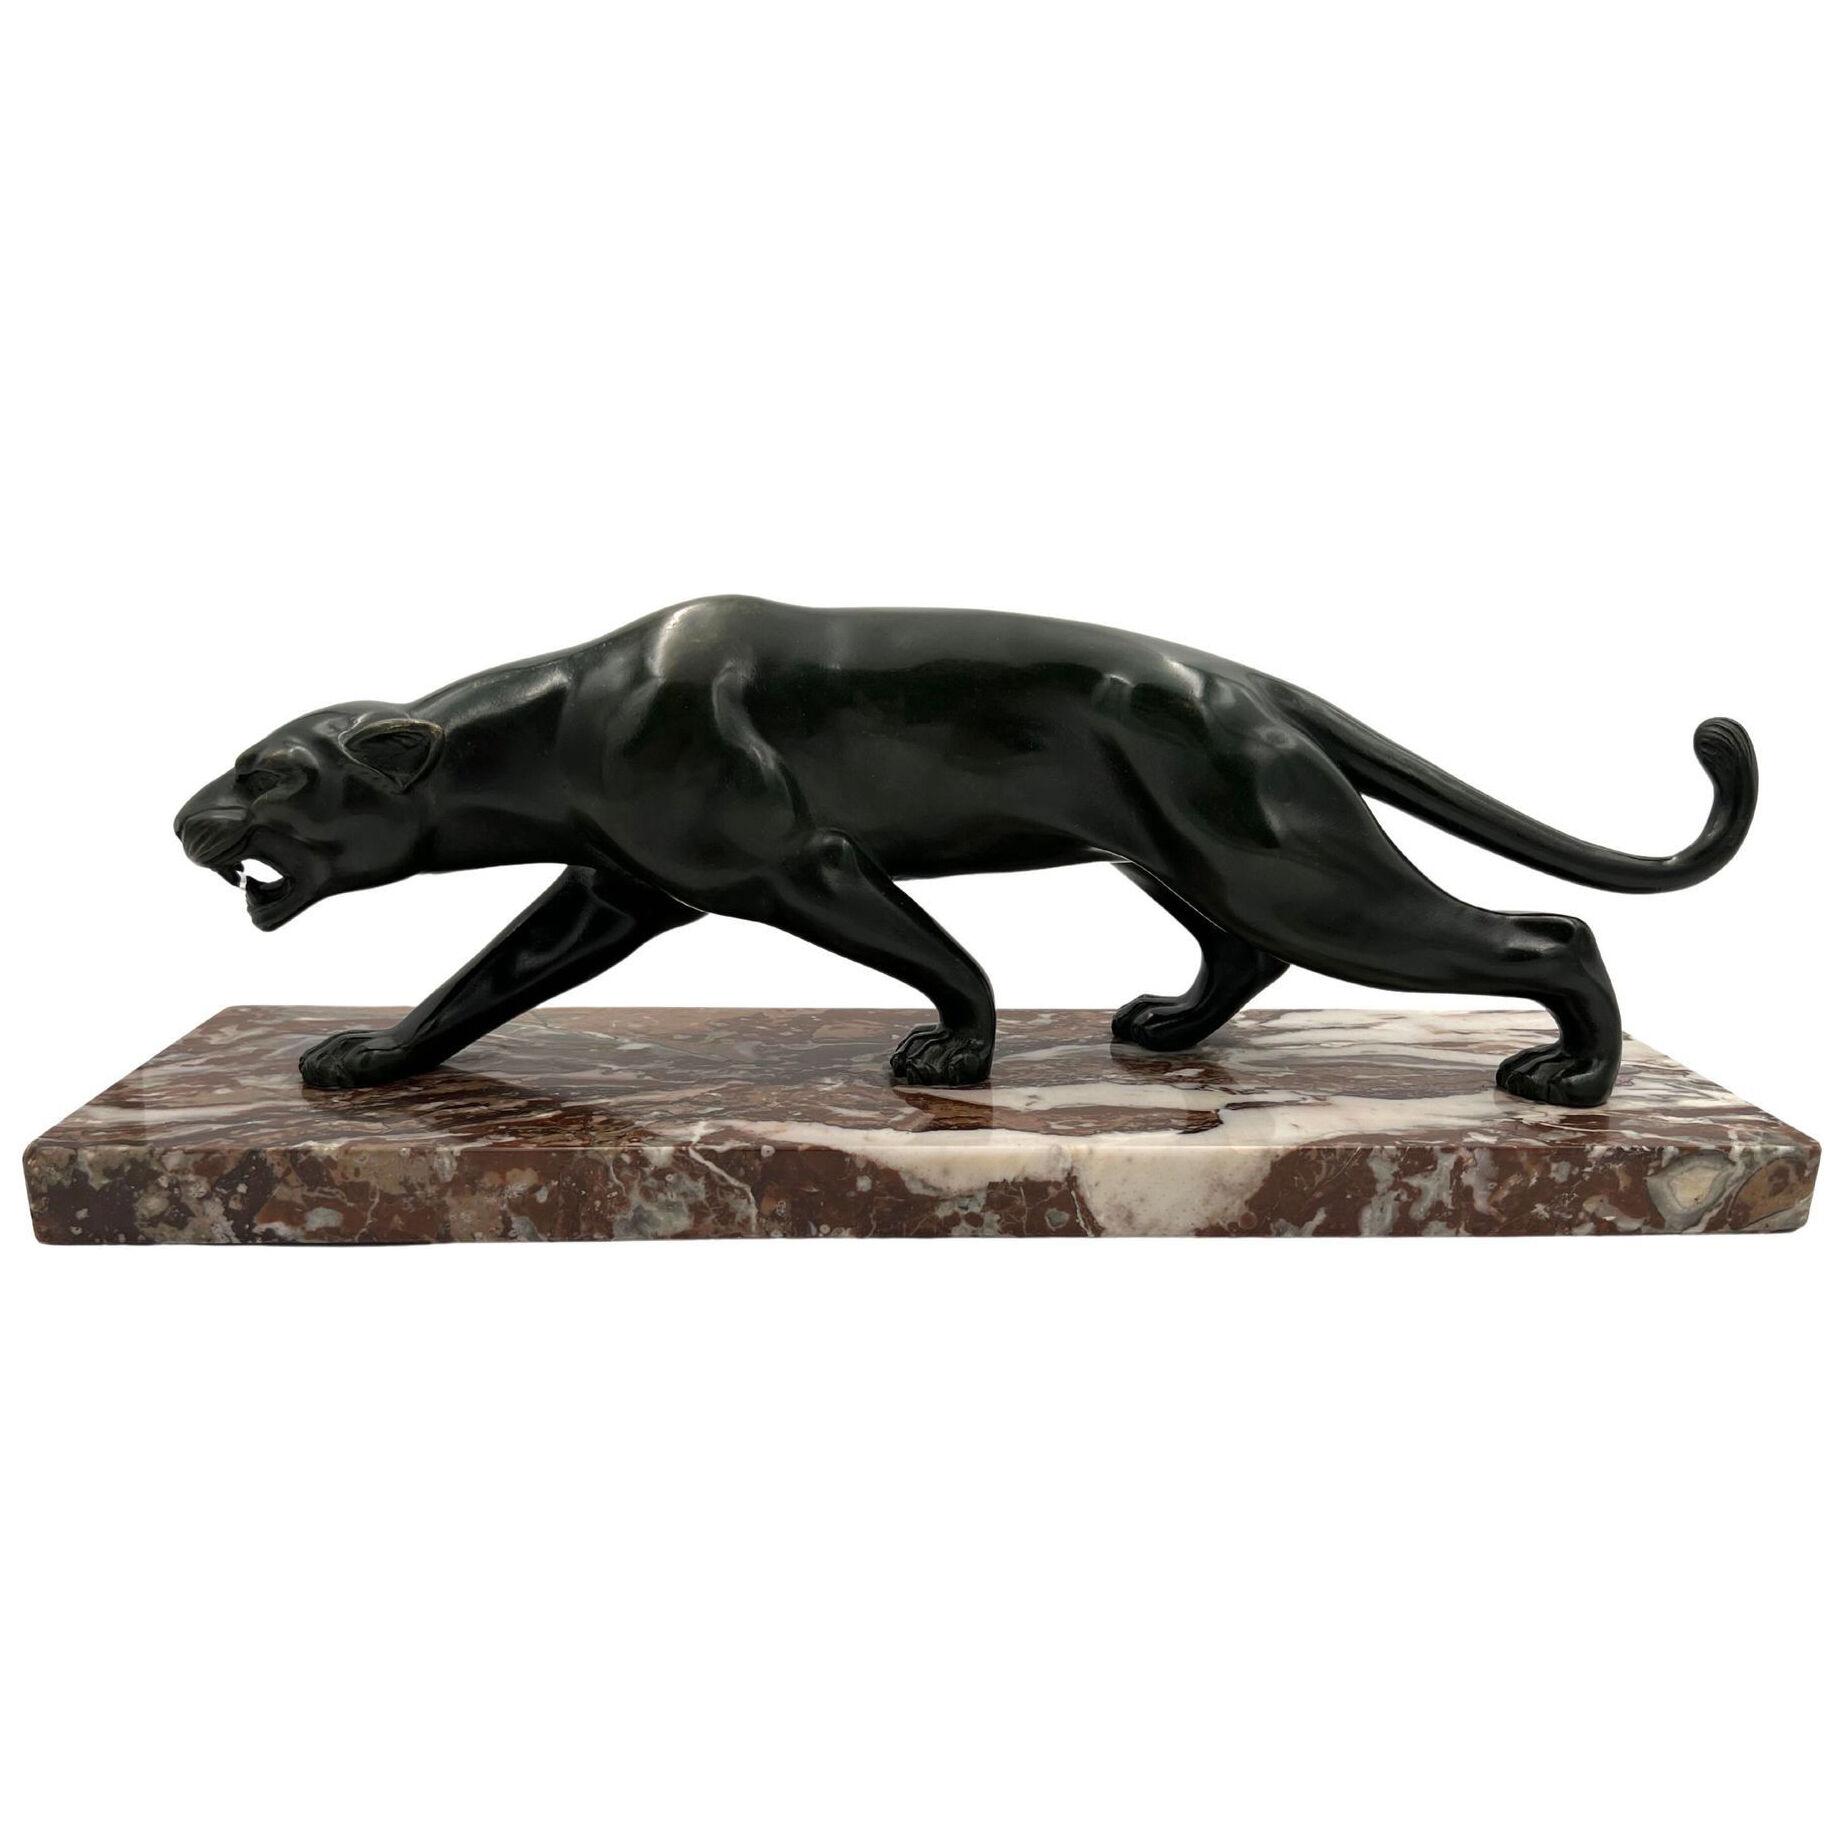 Art Deco Panther Sculpture by S. Melani, Bronze, Marble, France circa 1930